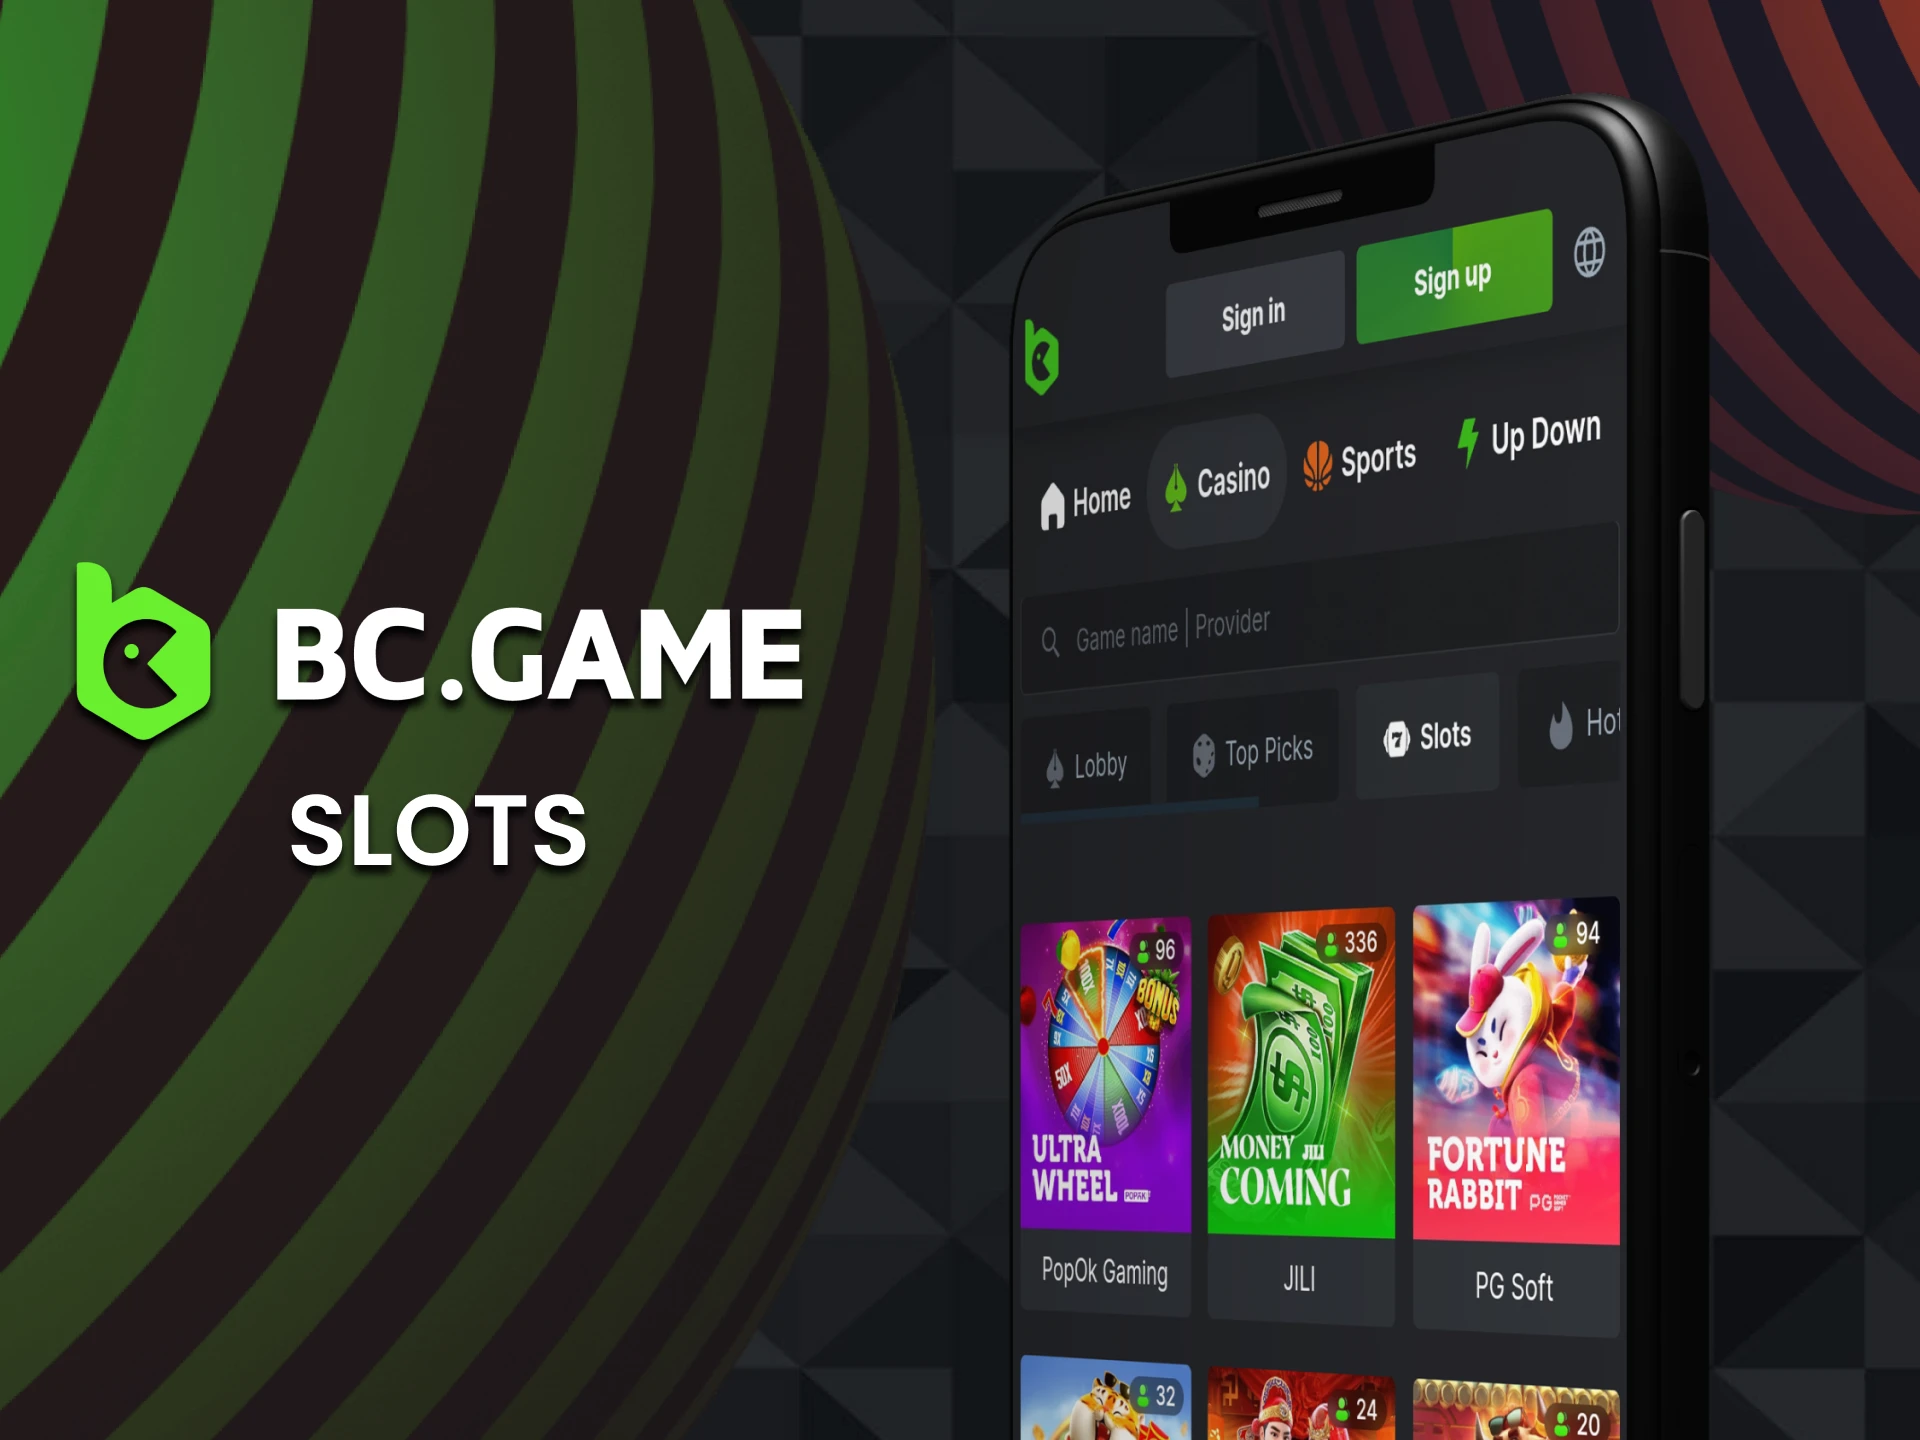 To play in the BC Game application, choose slots.